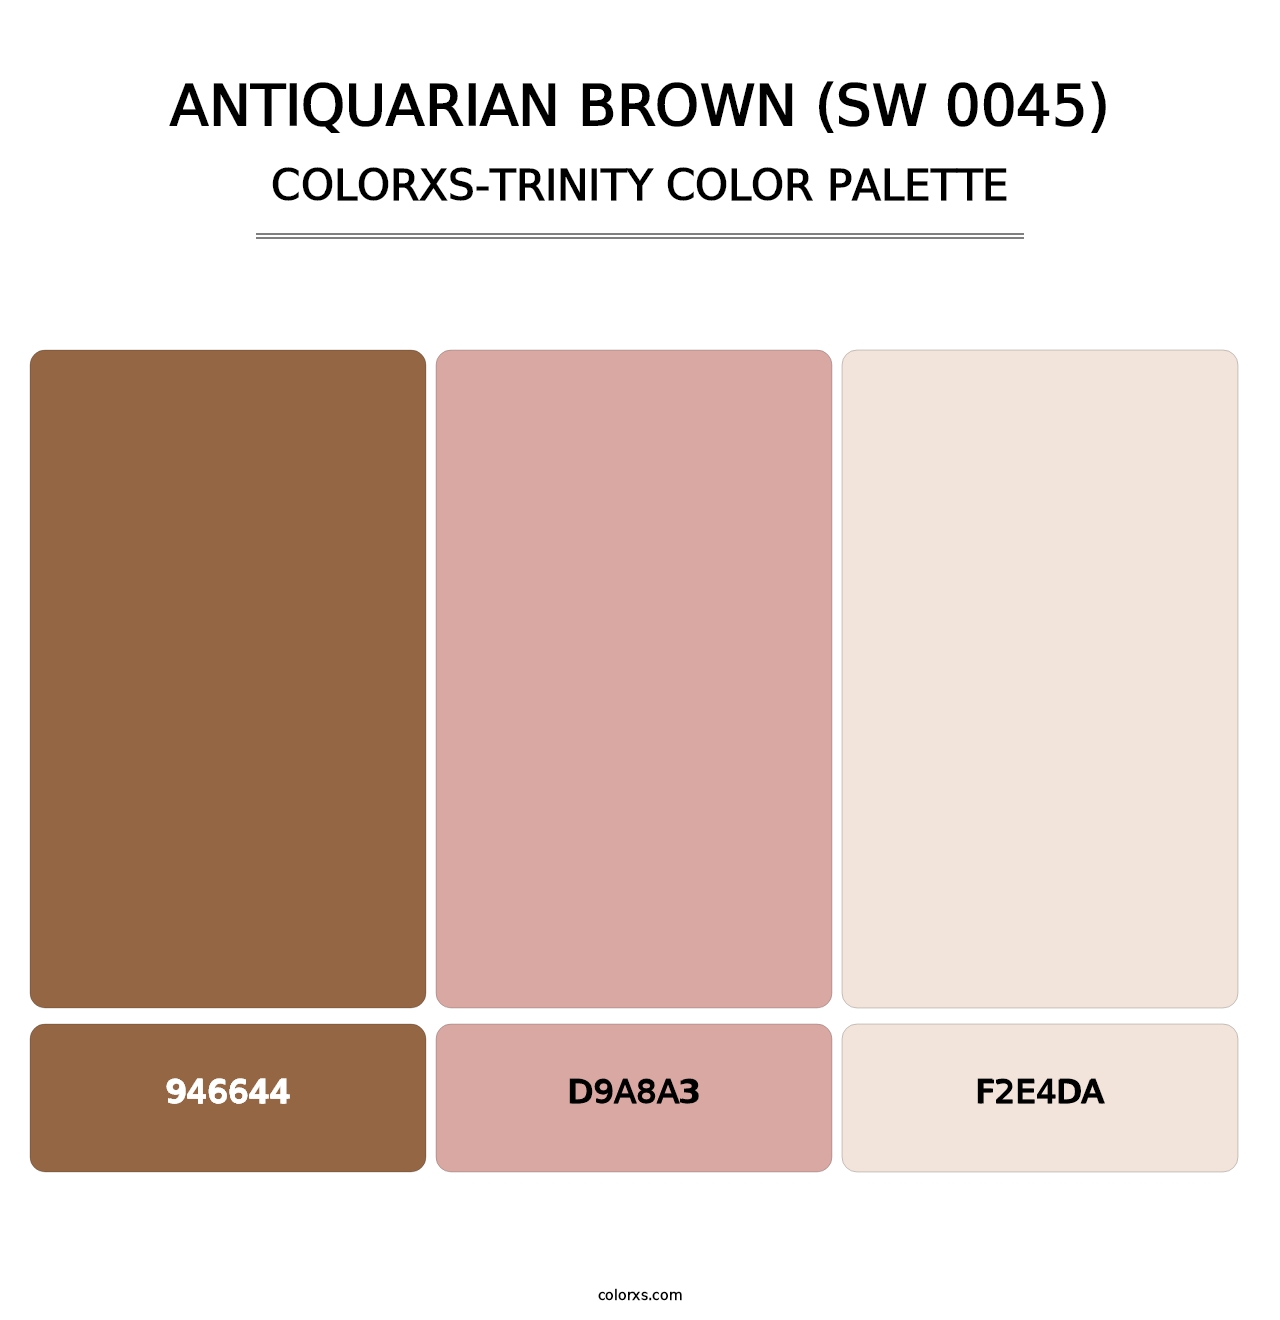 Antiquarian Brown (SW 0045) - Colorxs Trinity Palette